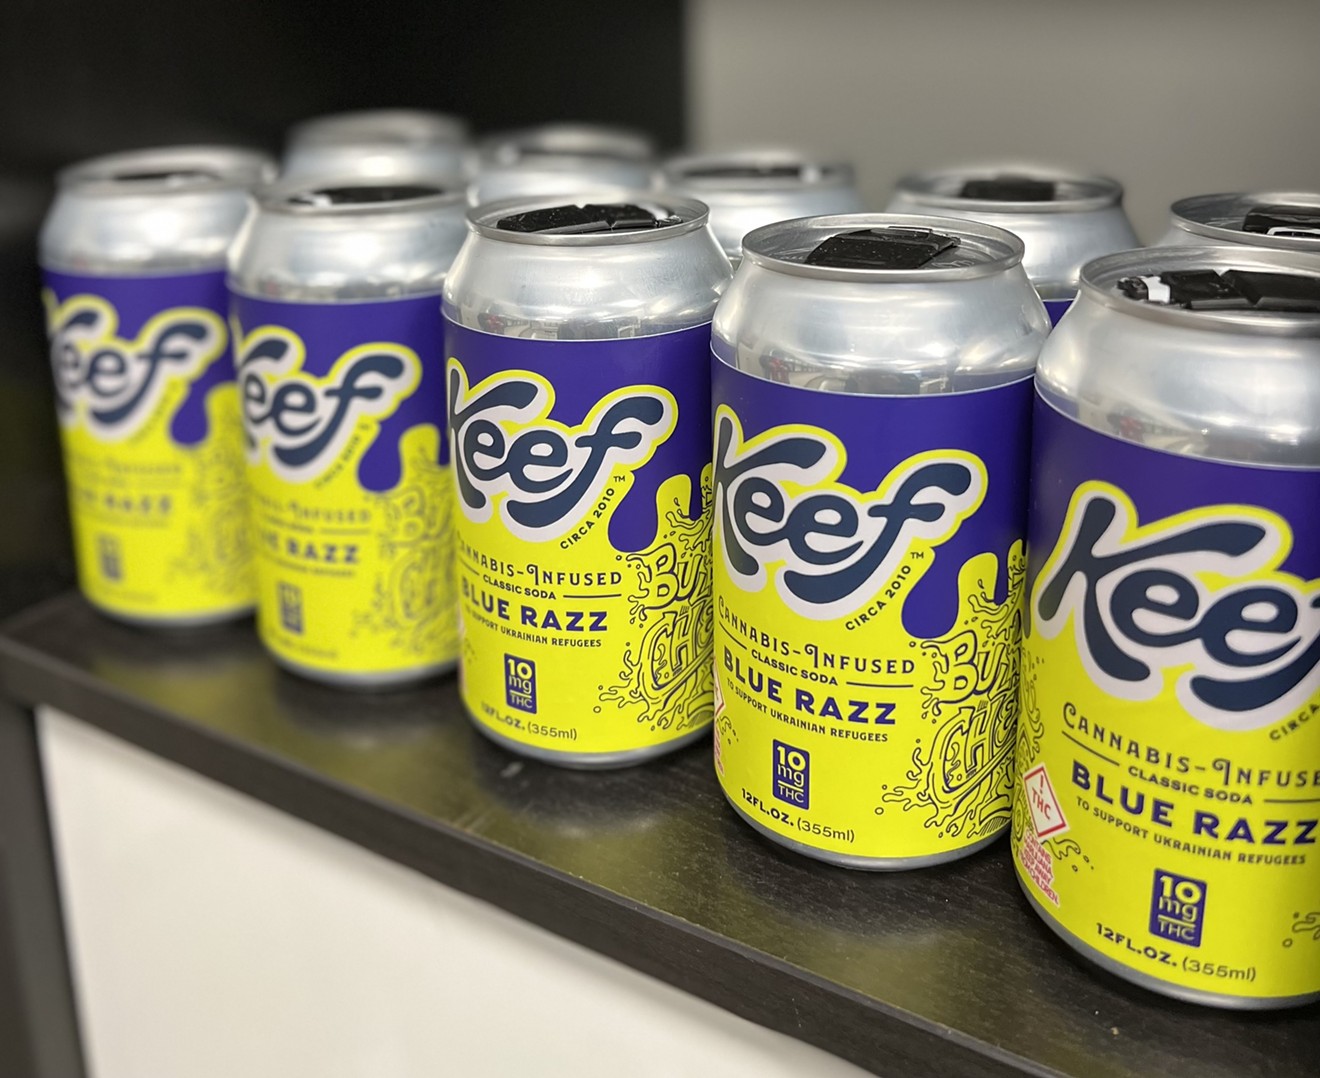 The special-edition cannabis sodas are currently sold in thirteen dispensaries across the Denver area, but Keef Brands hopes to partner with more stores.